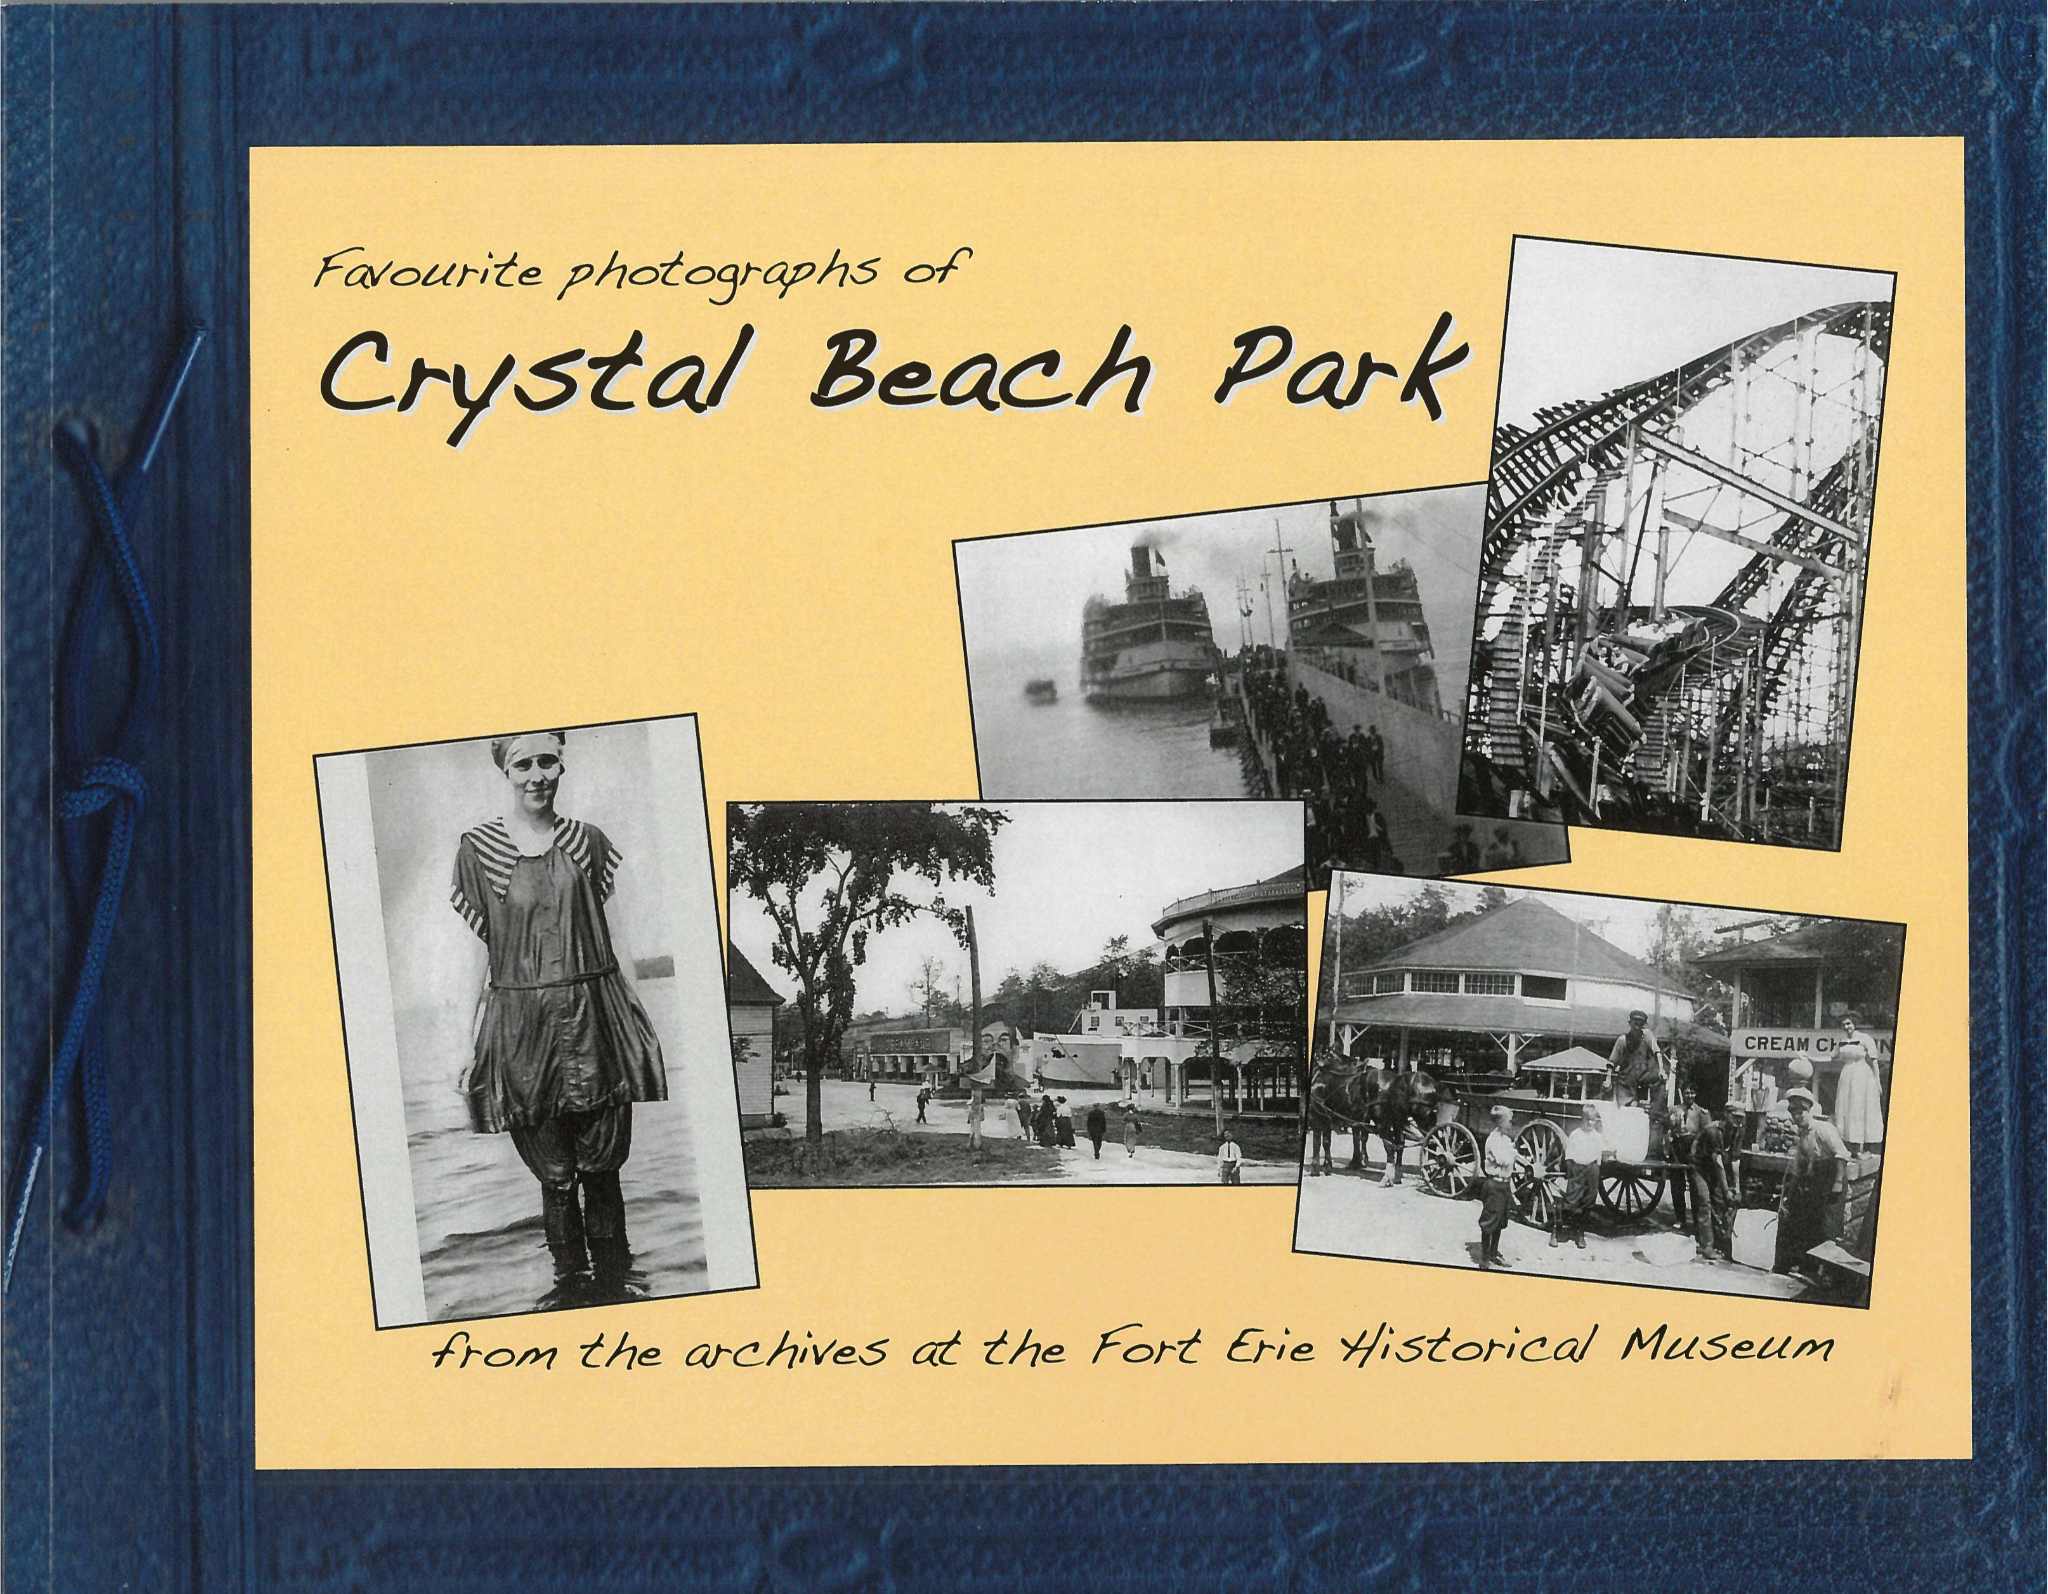 A book cover with multiple historic photos of Crystal Beach